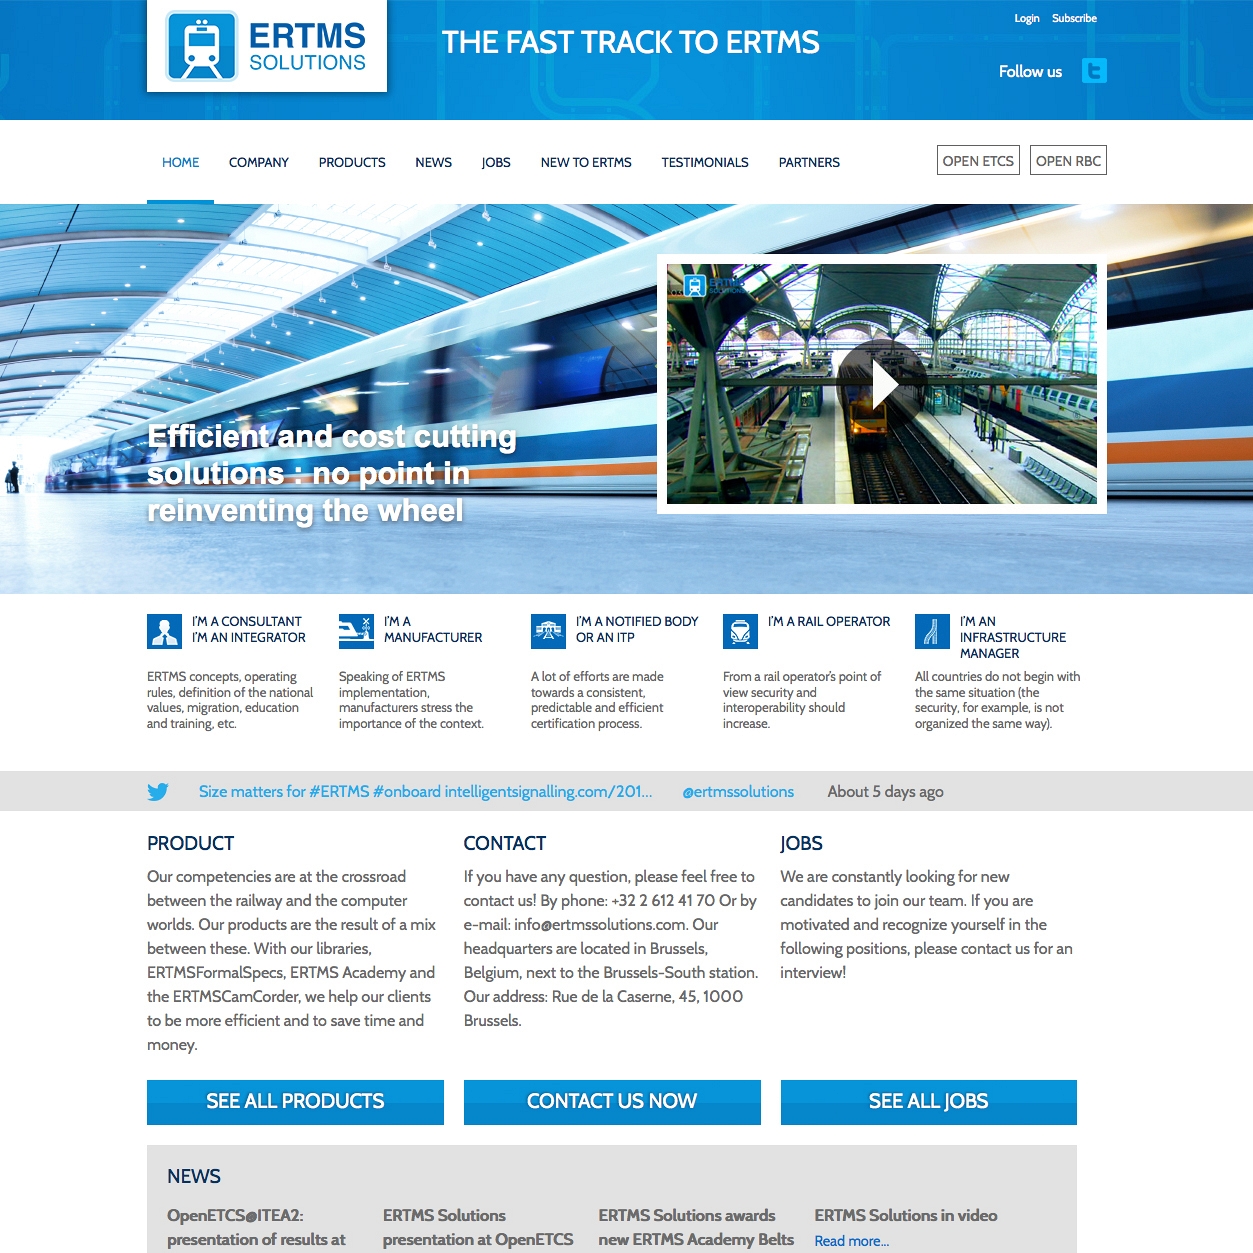 ERTMS Solutions